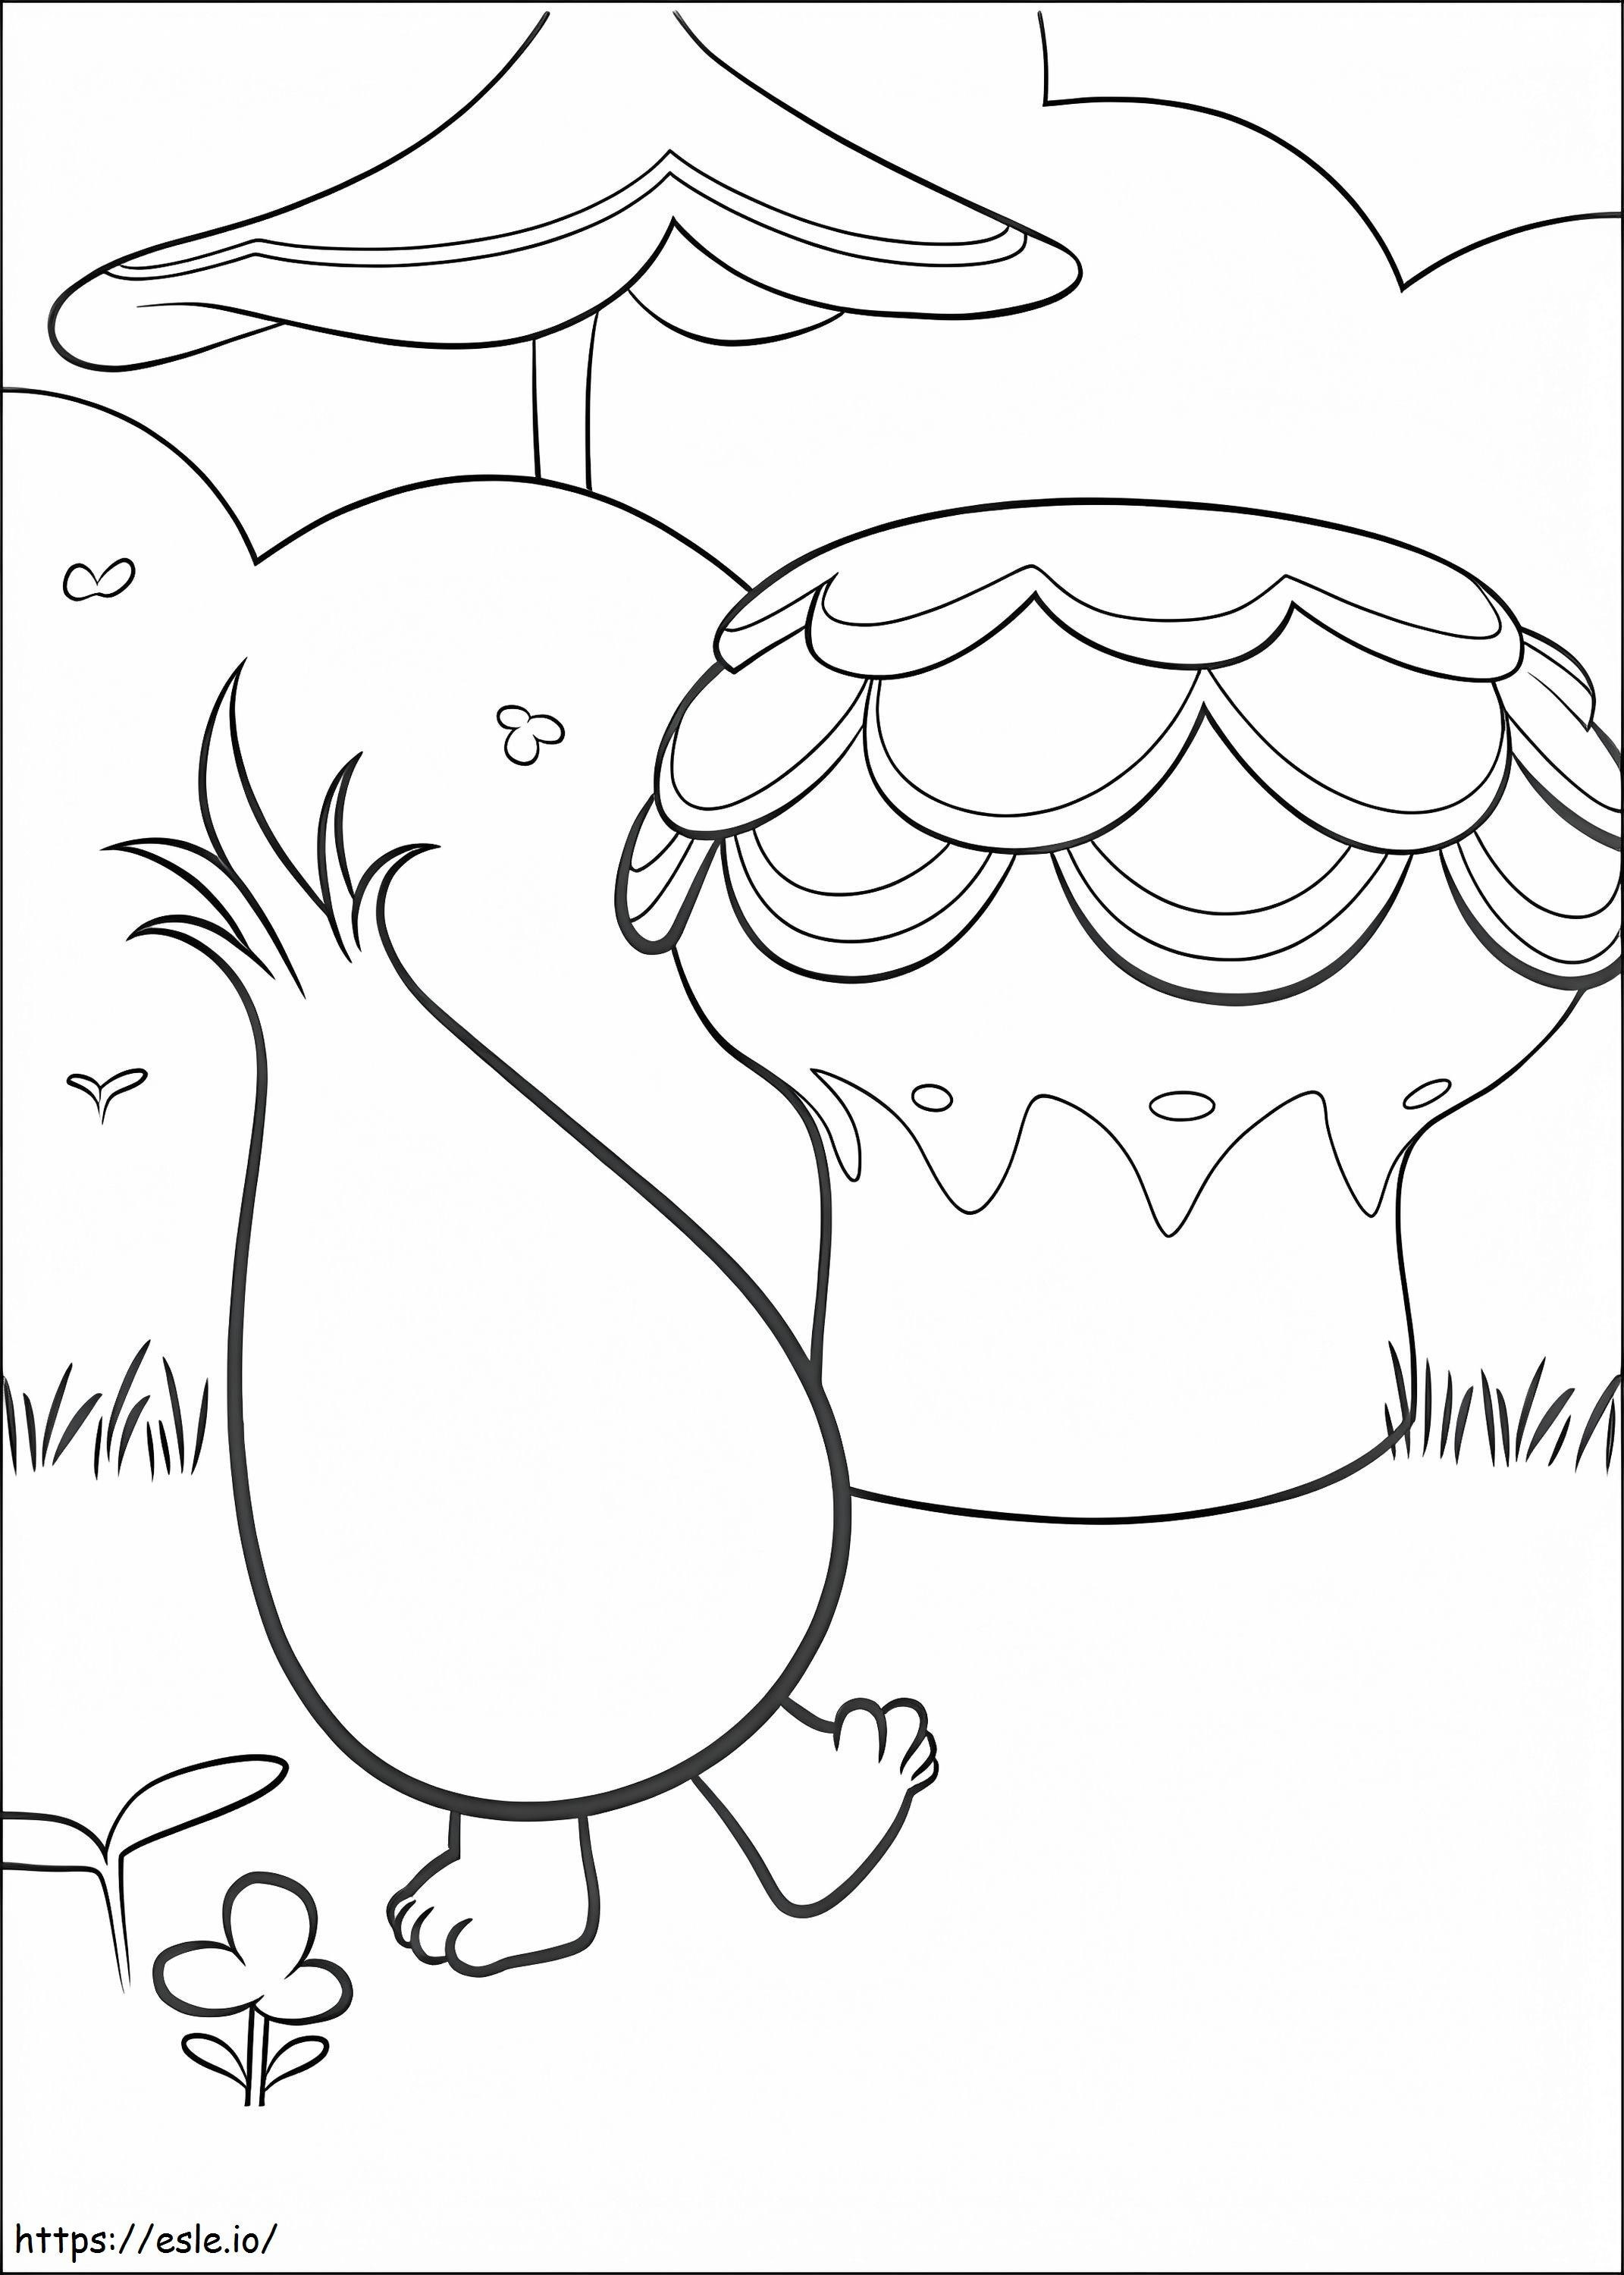 Troll Character coloring page